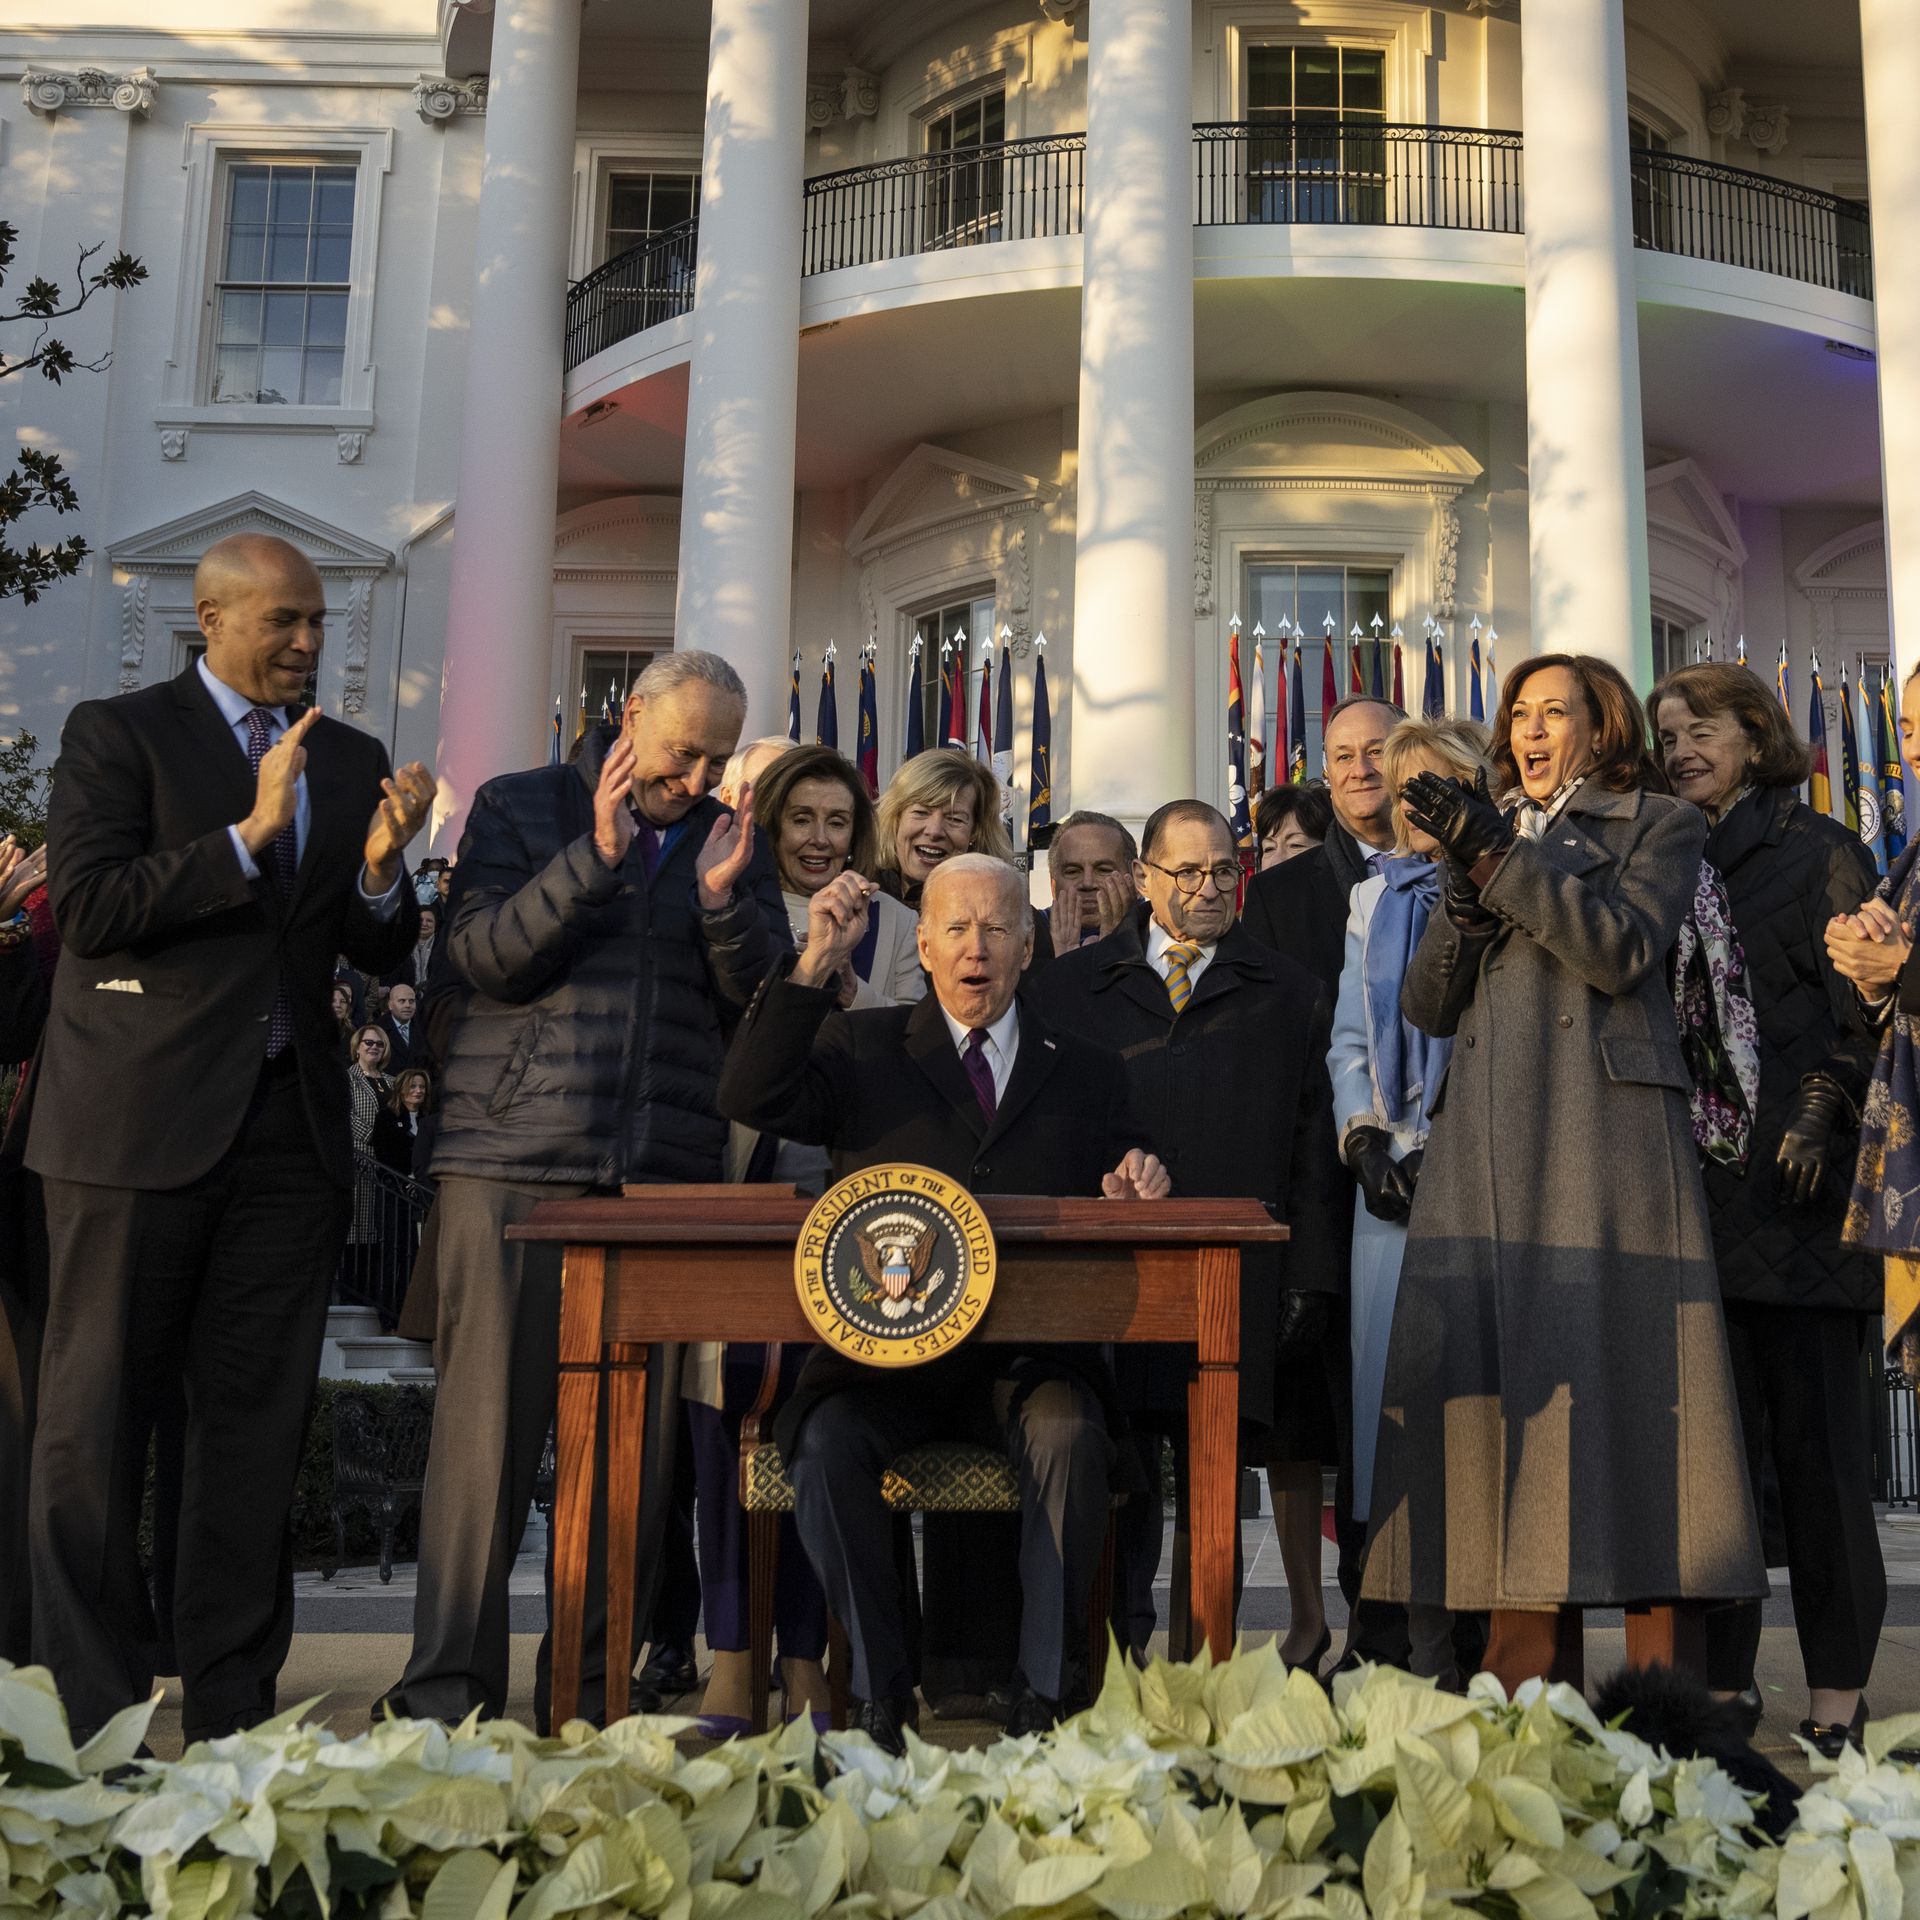 President Biden after signing the Respect for Marriage Act in Washington, D.C., on Dec. 13.